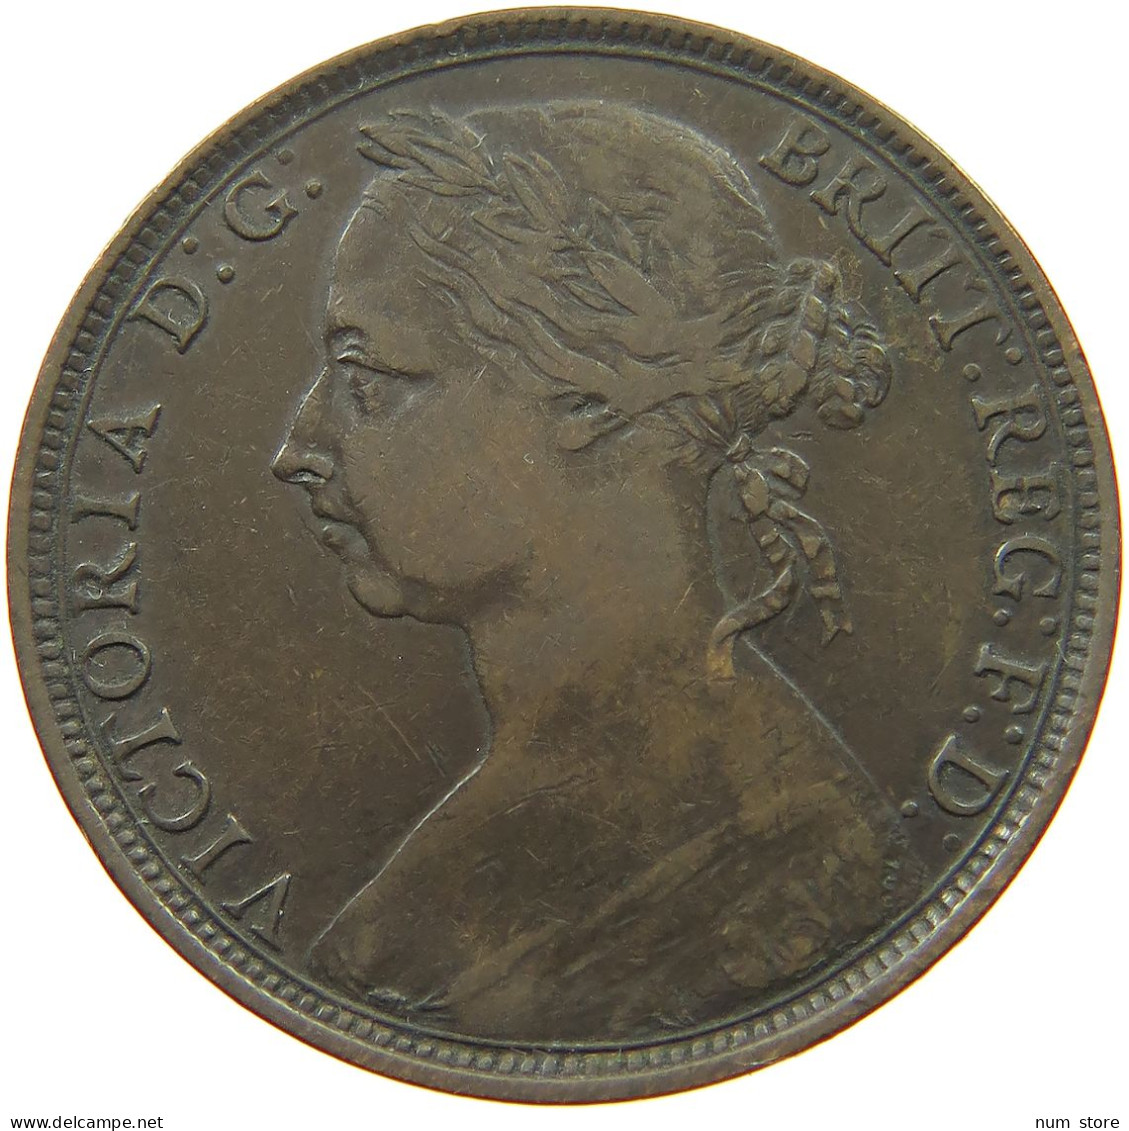 GREAT BRITAIN PENNY 1891 Victoria 1837-1901 #t100 0317 - D. 1 Penny